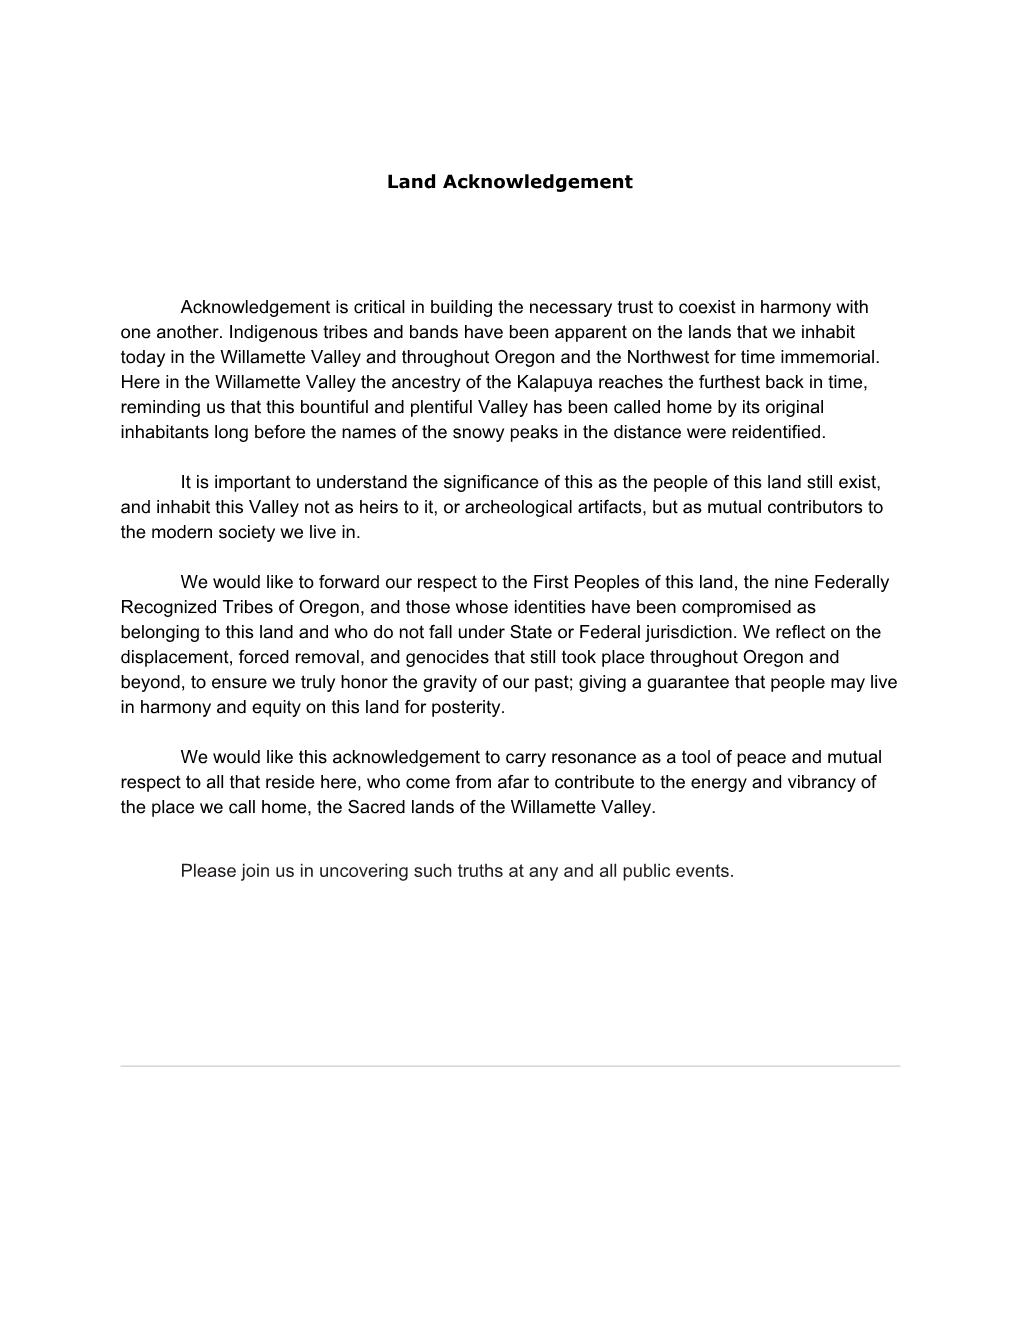 Land Acknowledgement Acknowledgement Is Critical In